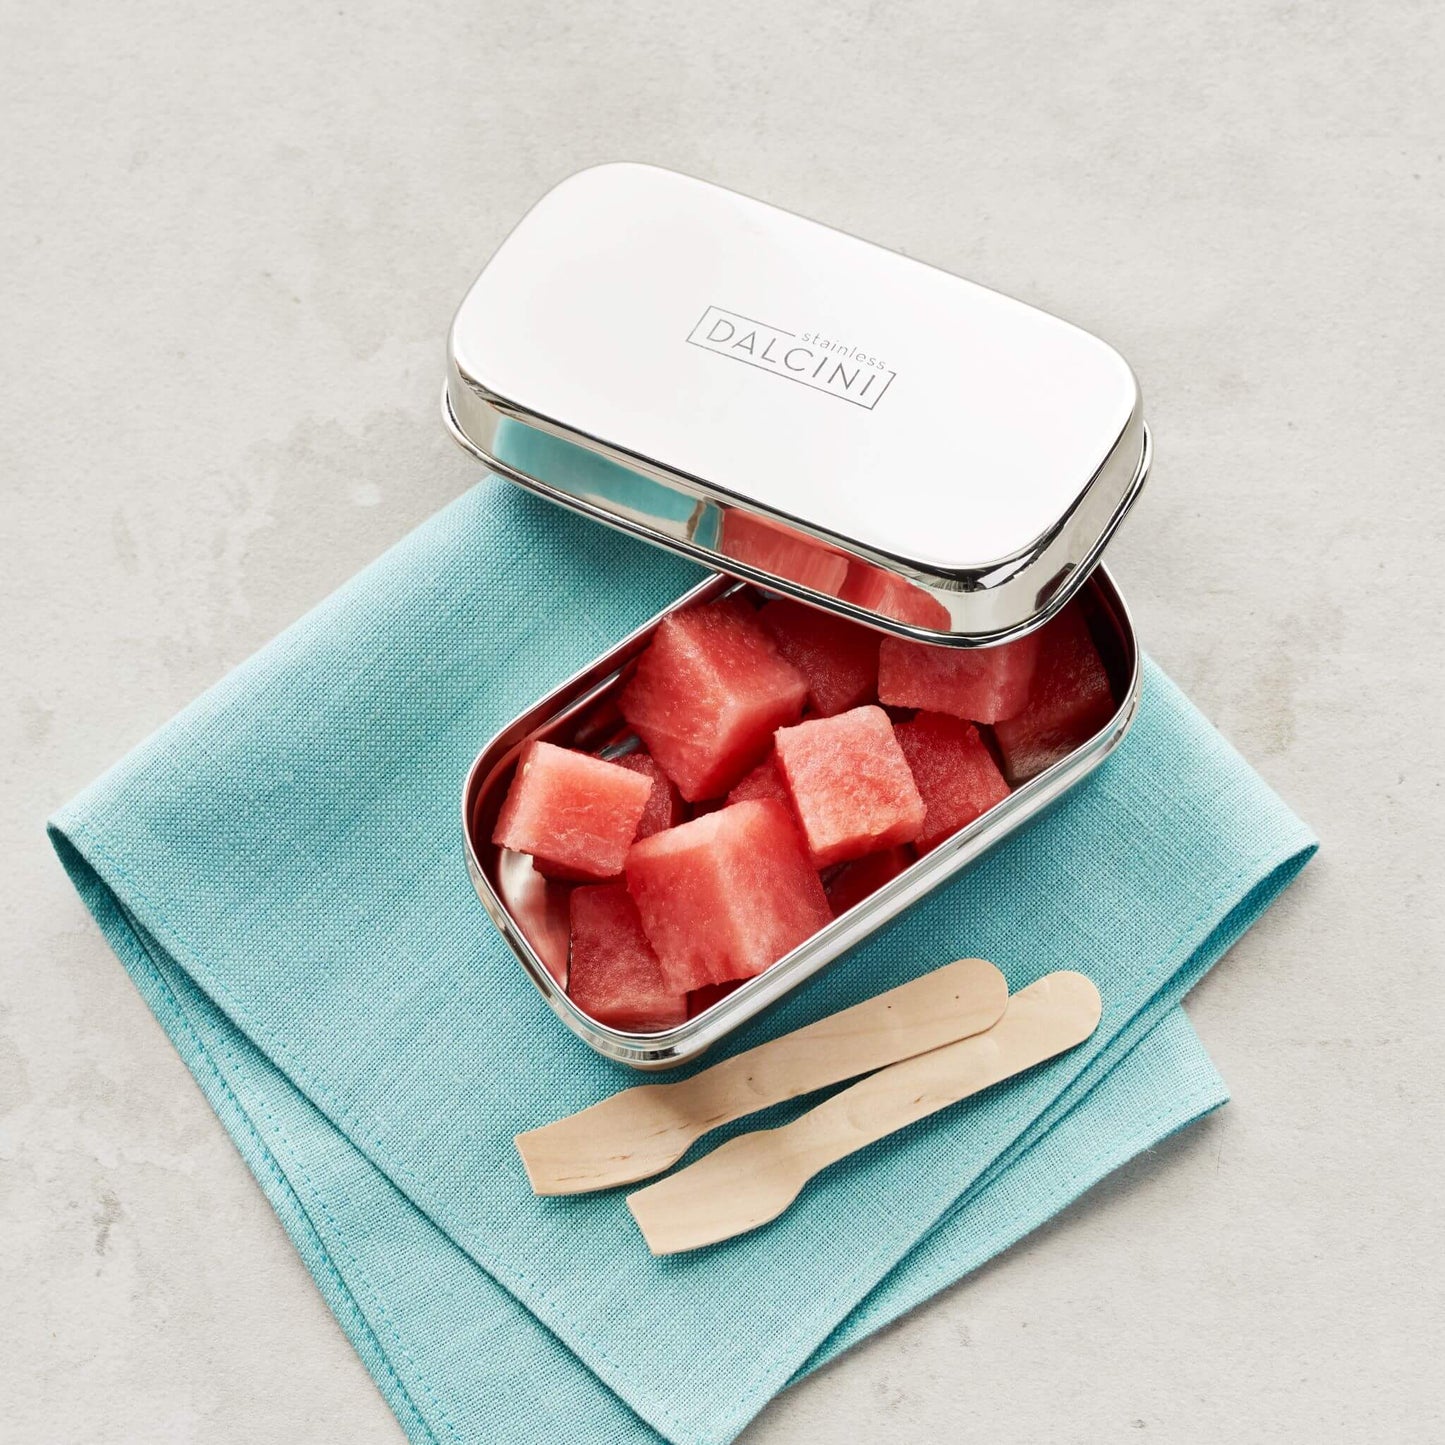 Watermelon cubes in stainless steel snack box next to wood utensils